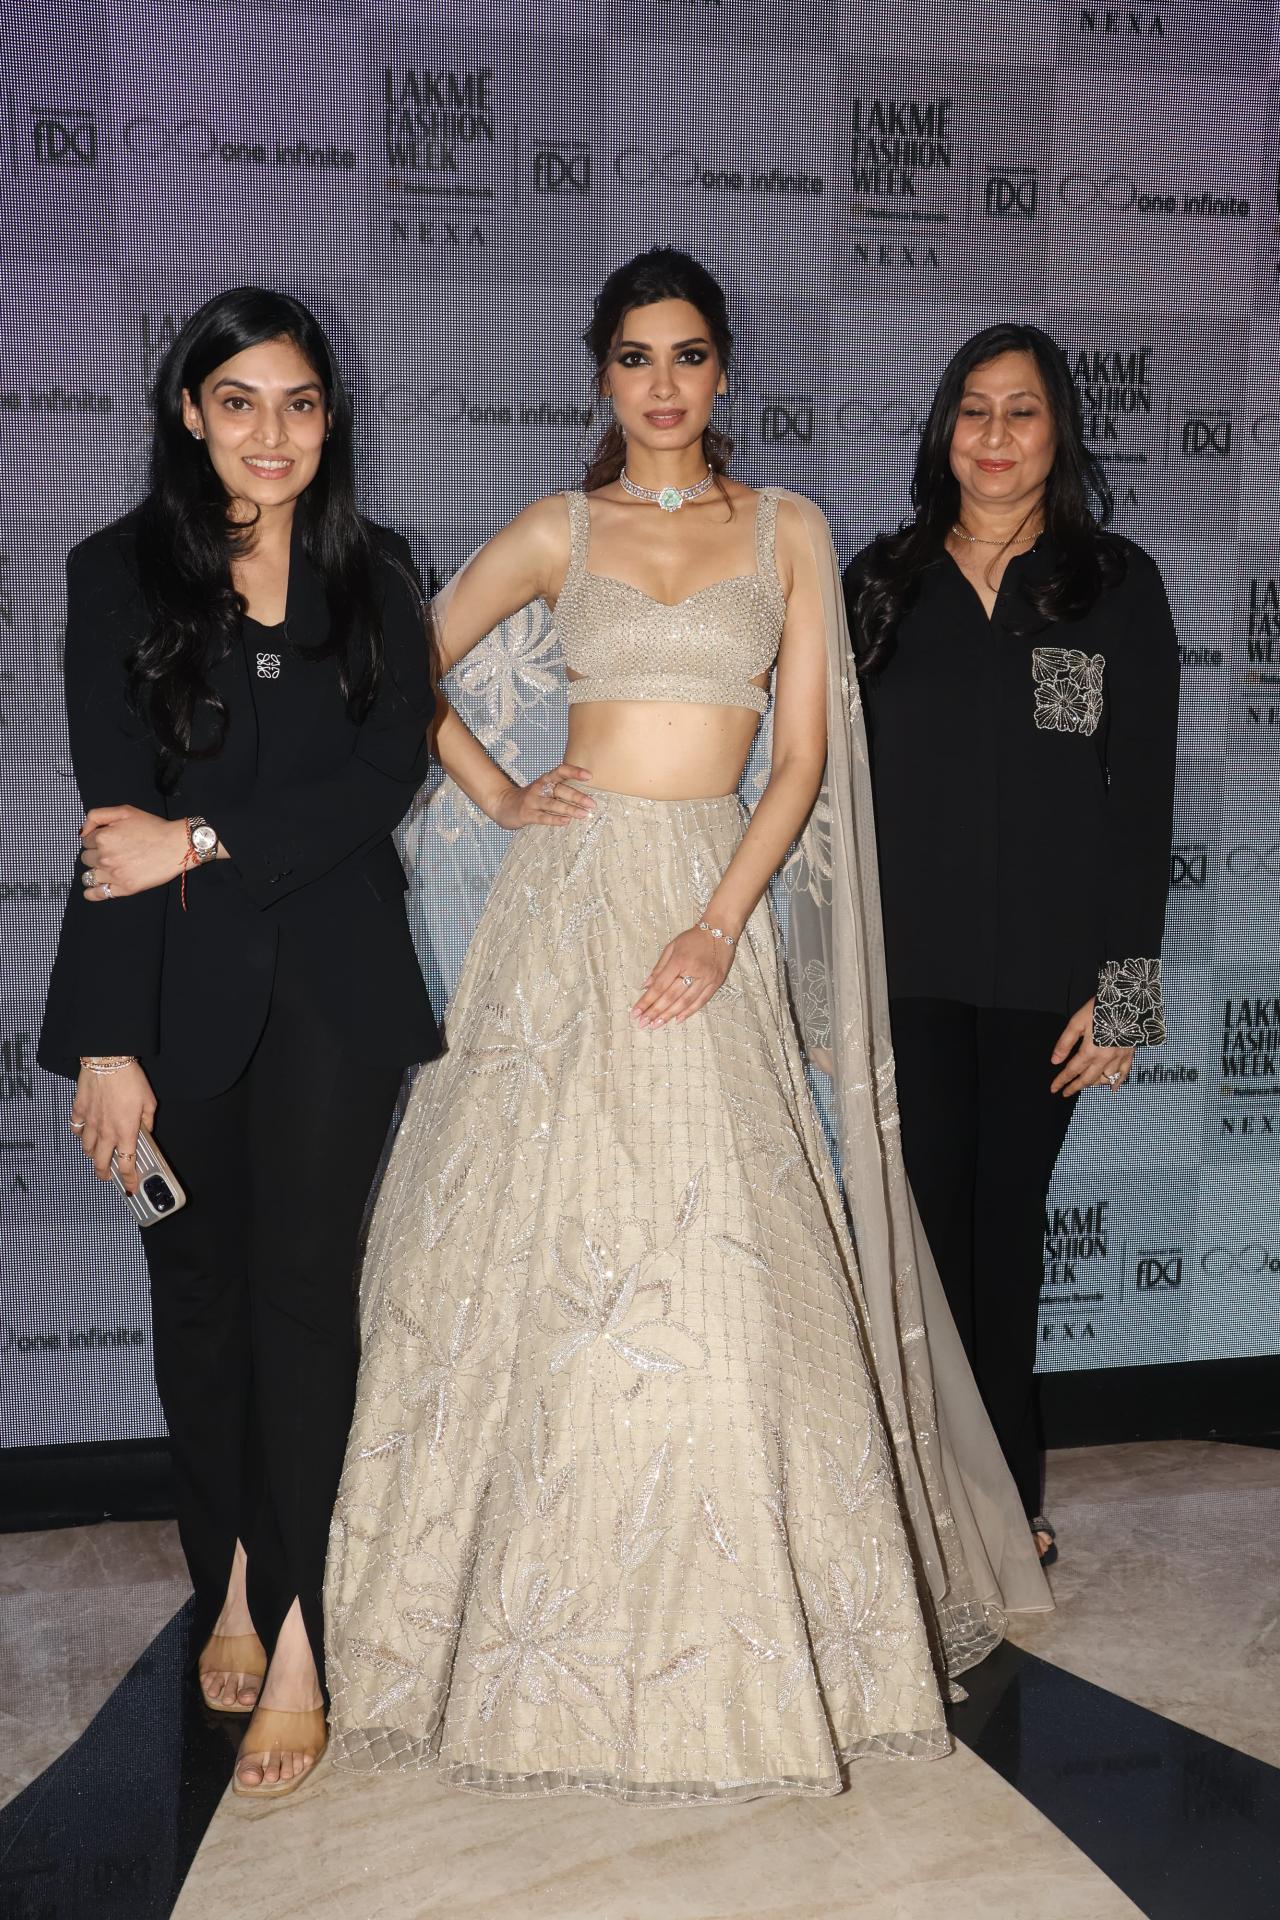 Diana, who started her career as a model, walked the ramp as a showstopper at Lakmé Fashion Week x FDCI for designer duo Charu and Vasundhara